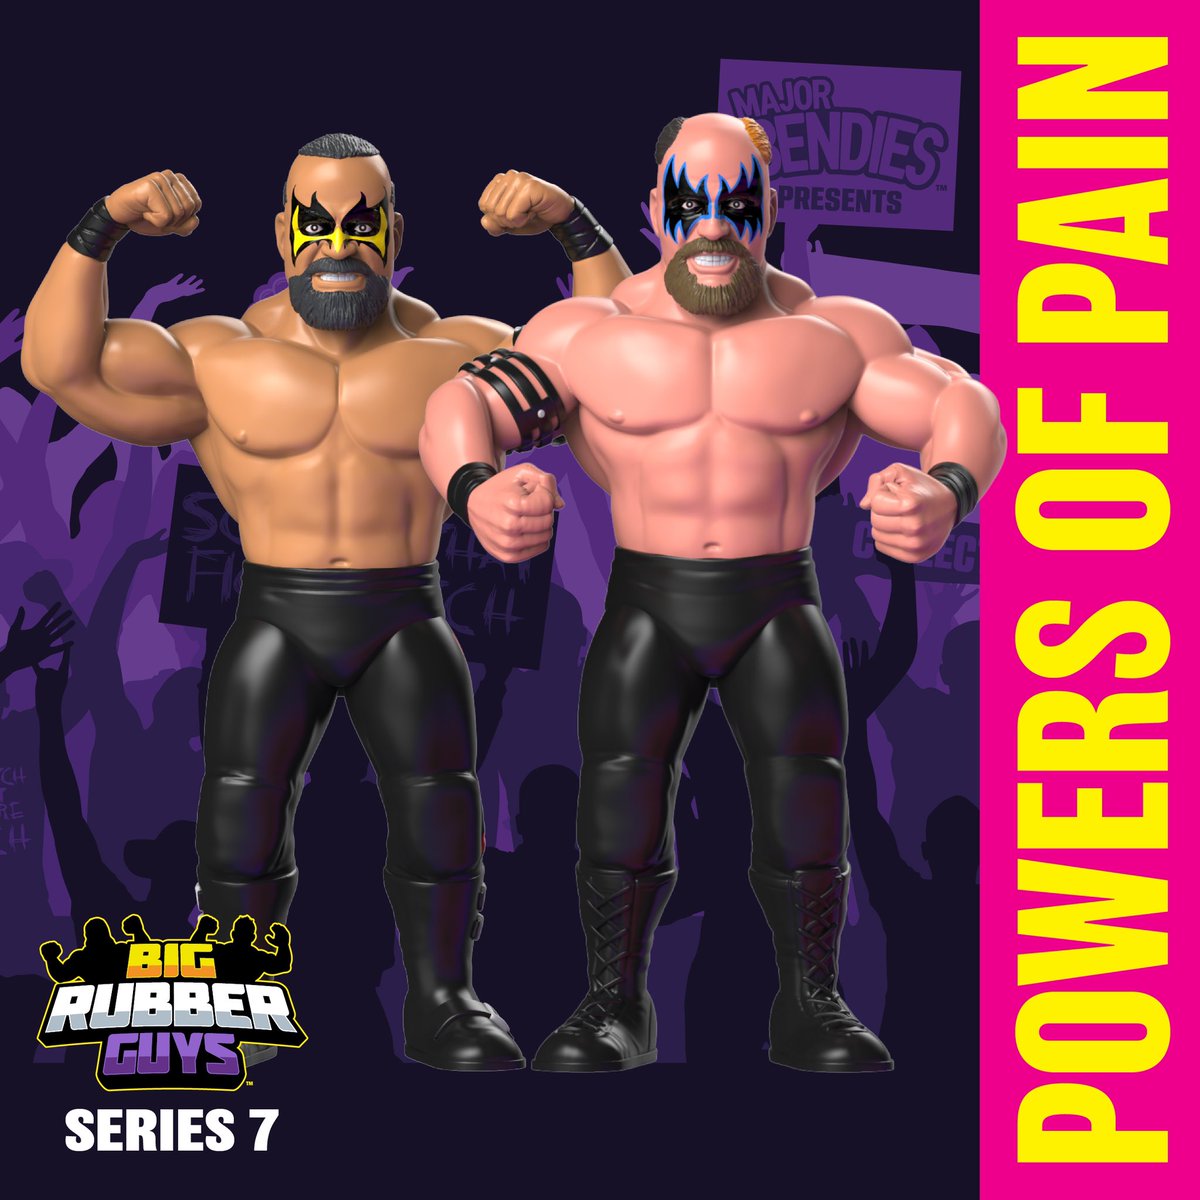 Are you in need of Dusty Rhodes or Powers of Pain?

These #BigRubberGuys are currently available to pre-order until the end of April at MajorBendies.com which is sooner than you think so don’t miss out!

Thanks to those who have already ordered!

#ScratchThatFigureItch